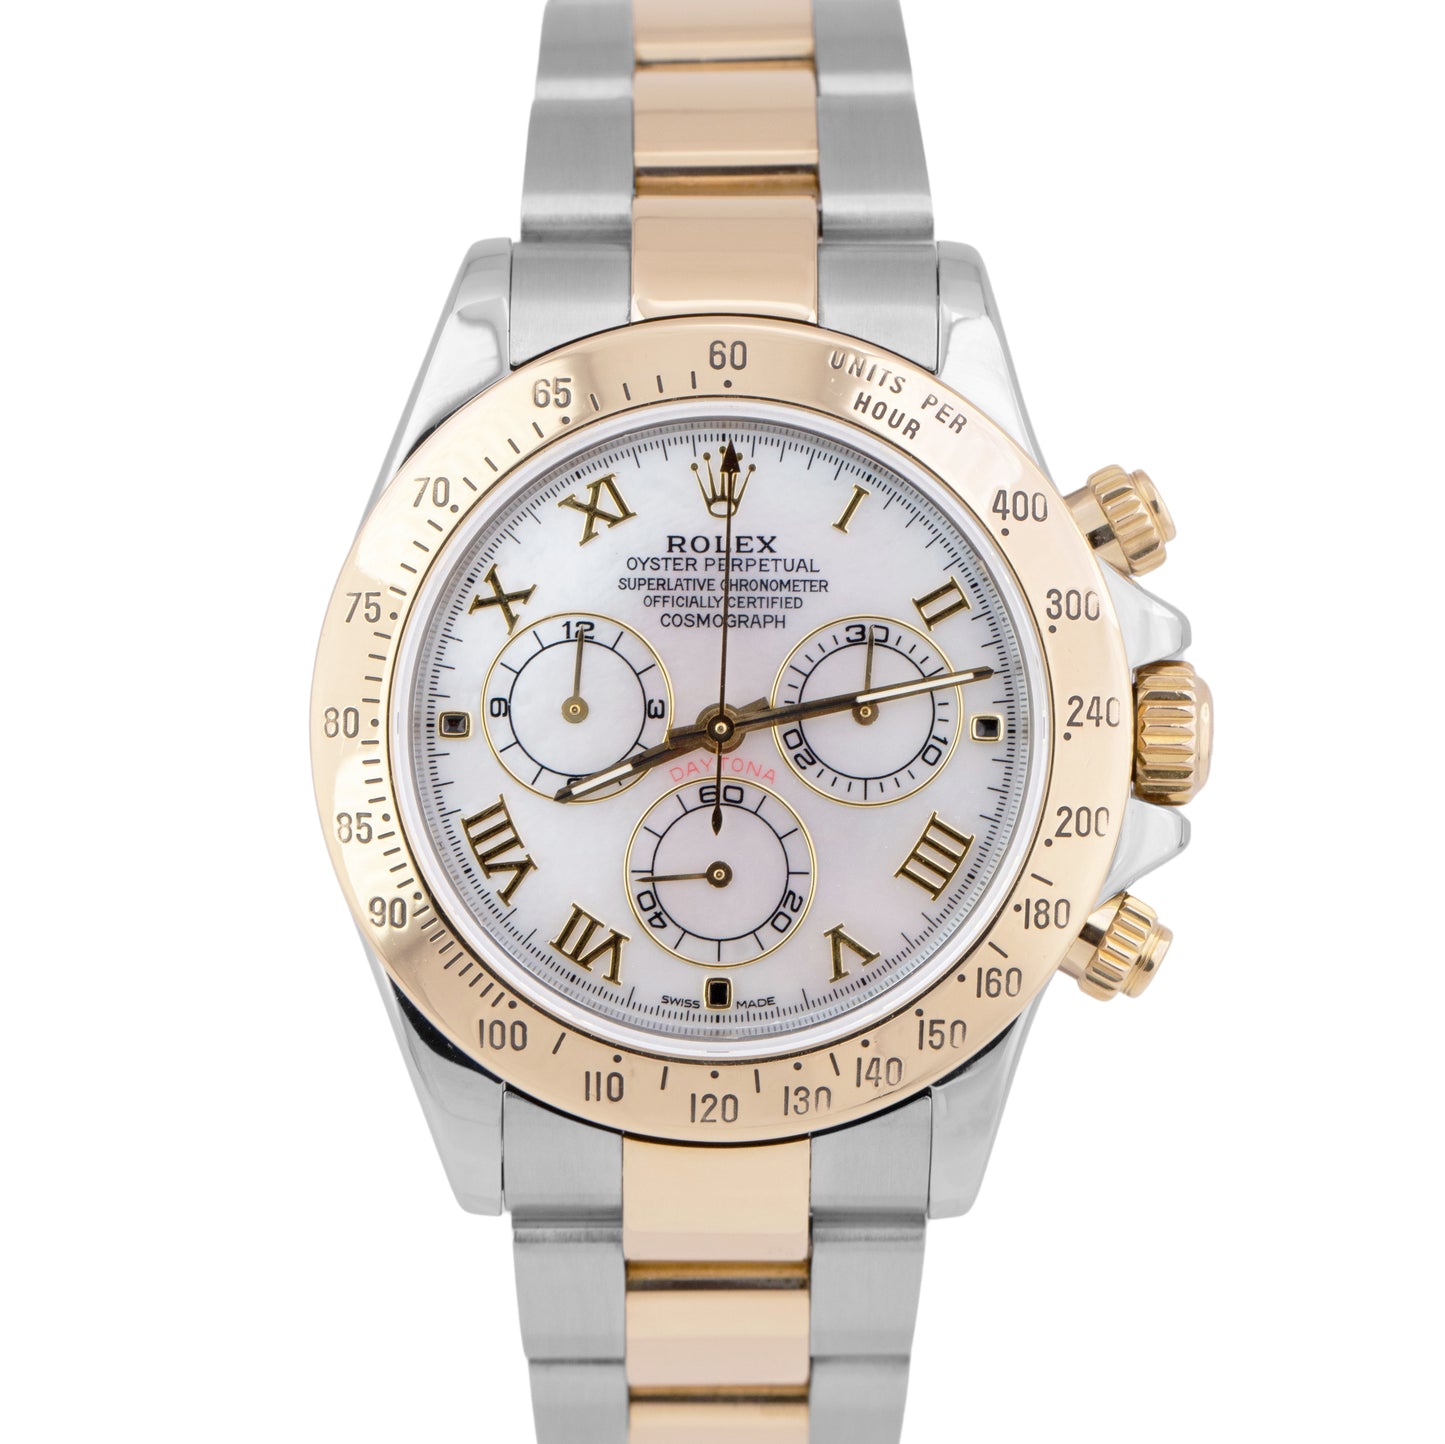 Rolex Daytona Cosmograph 40mm MOTHER OF PEARL Two-Tone Gold Steel Watch 116523